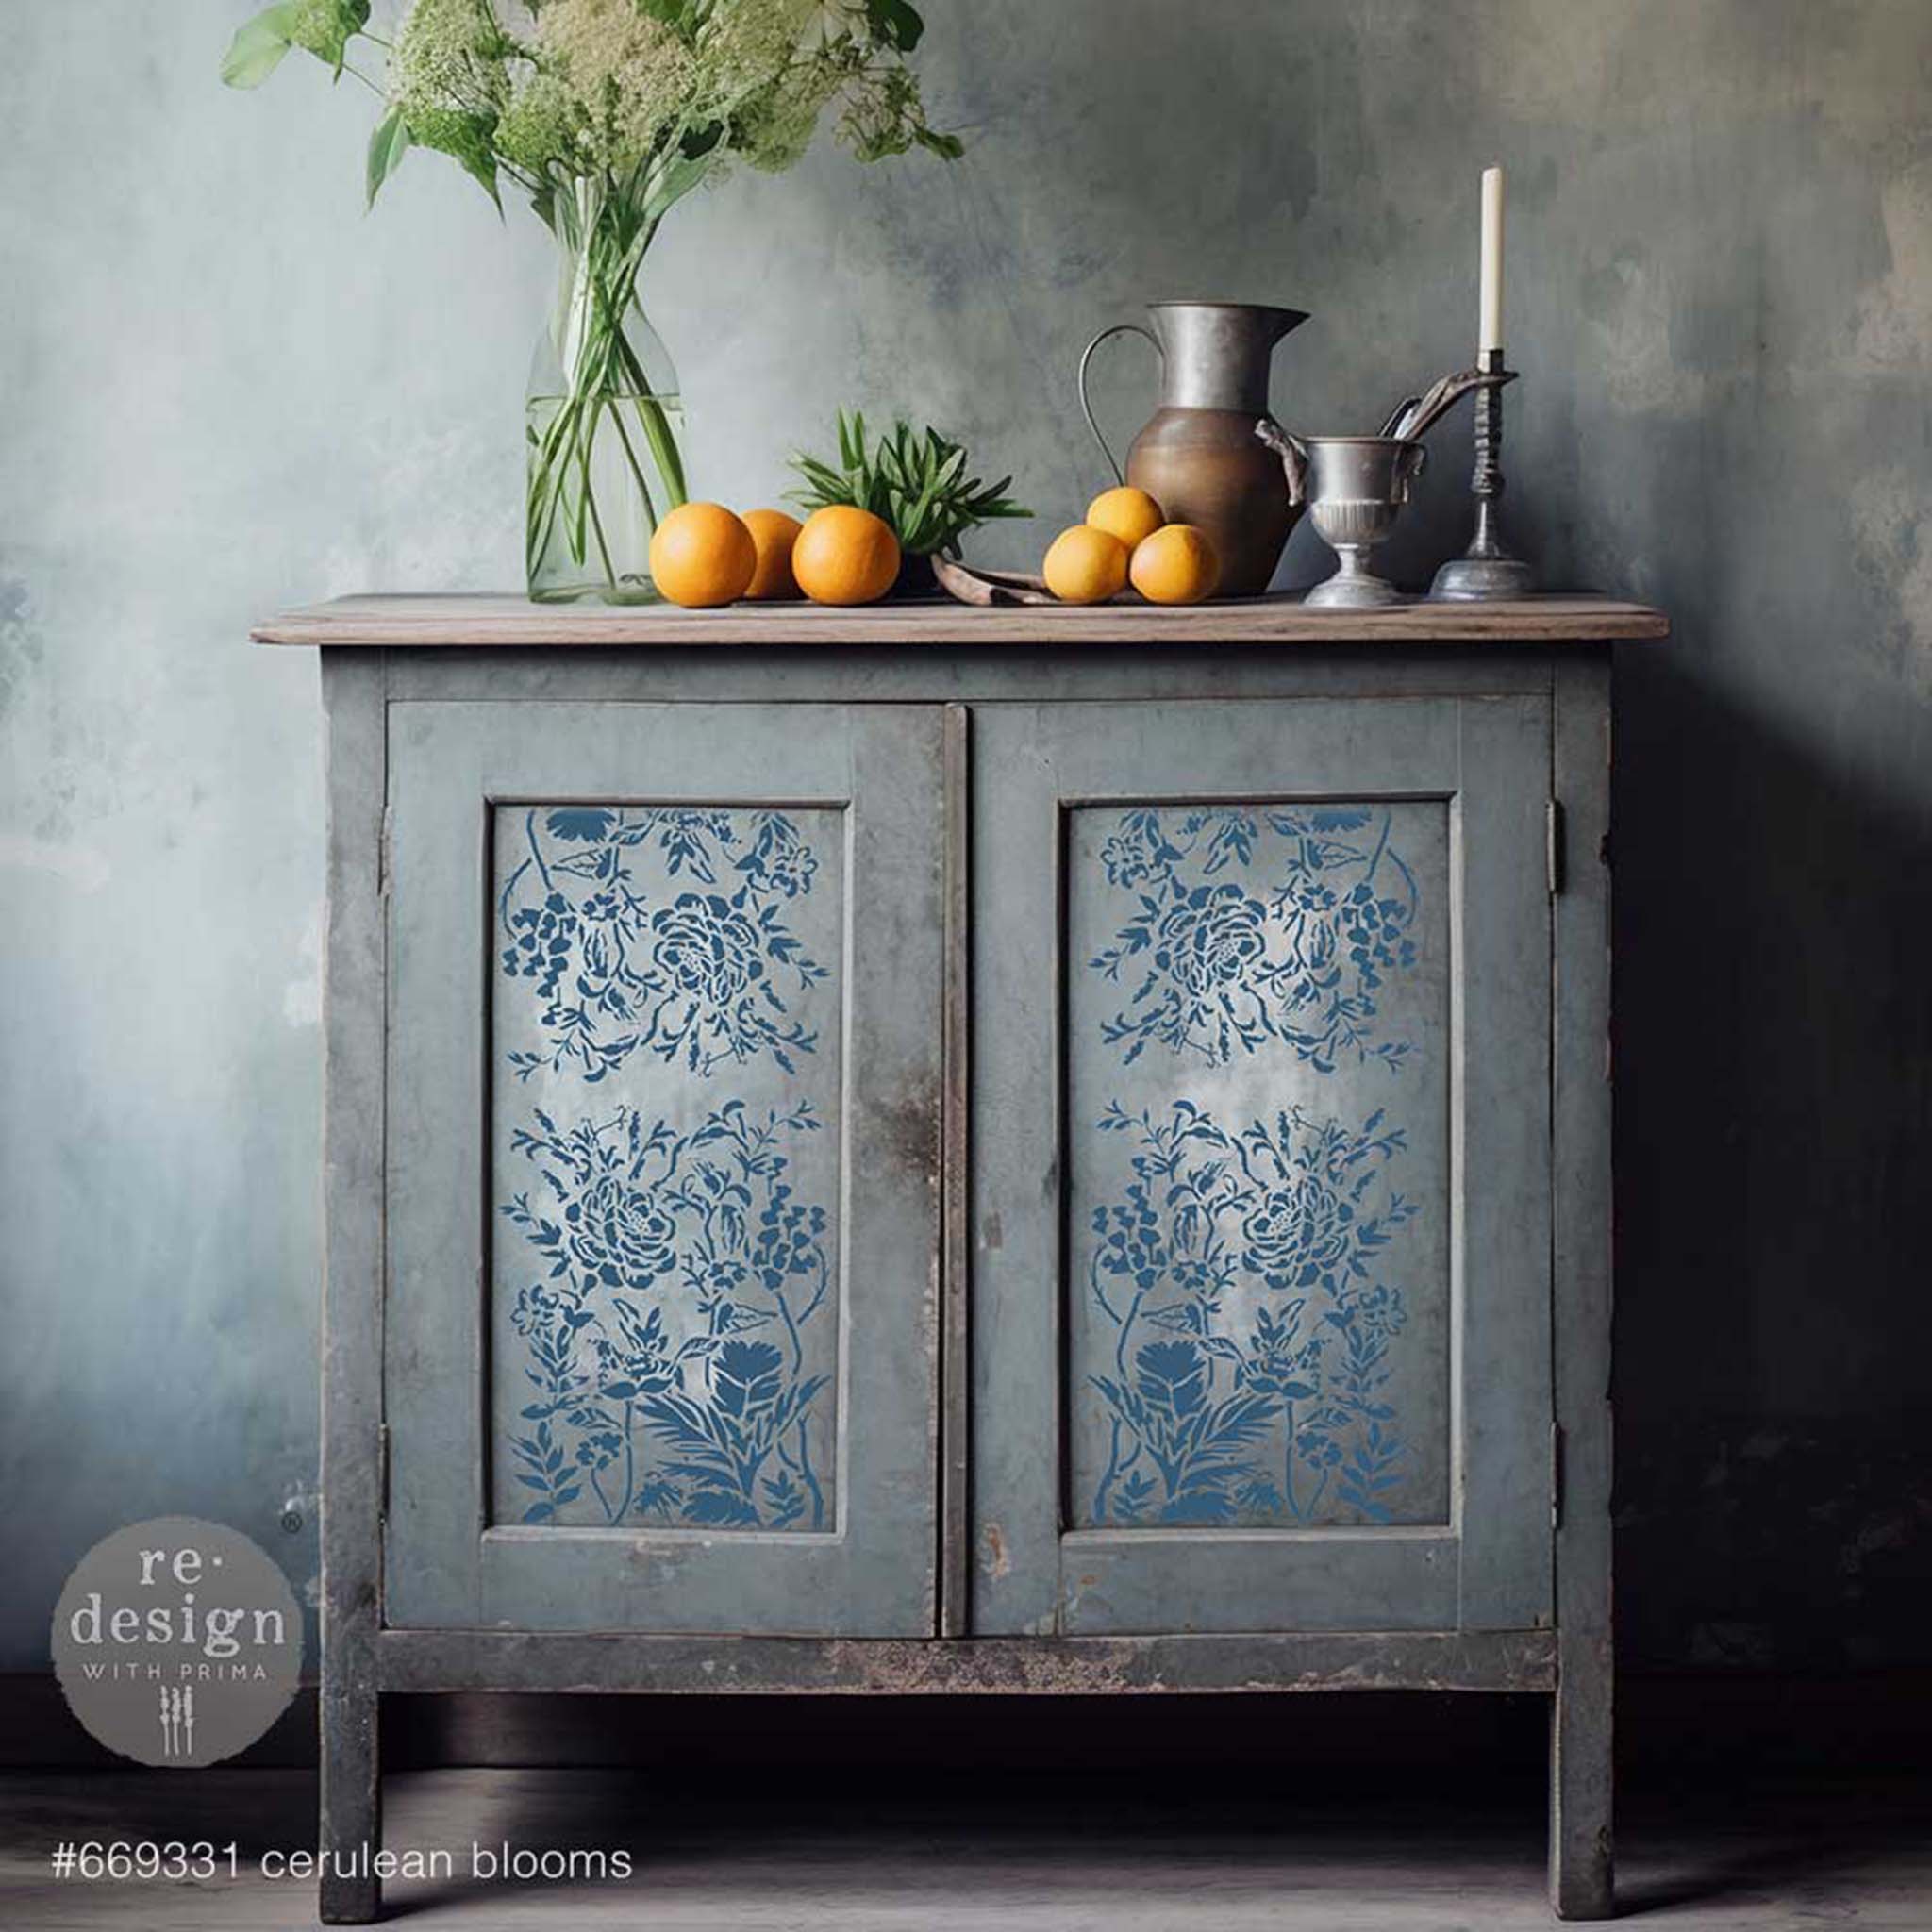 A vintage small buffet console is painted grey and feautres ReDesign with Prima's Cerulean Blooms stencil in blue inside its 2 door inlays.